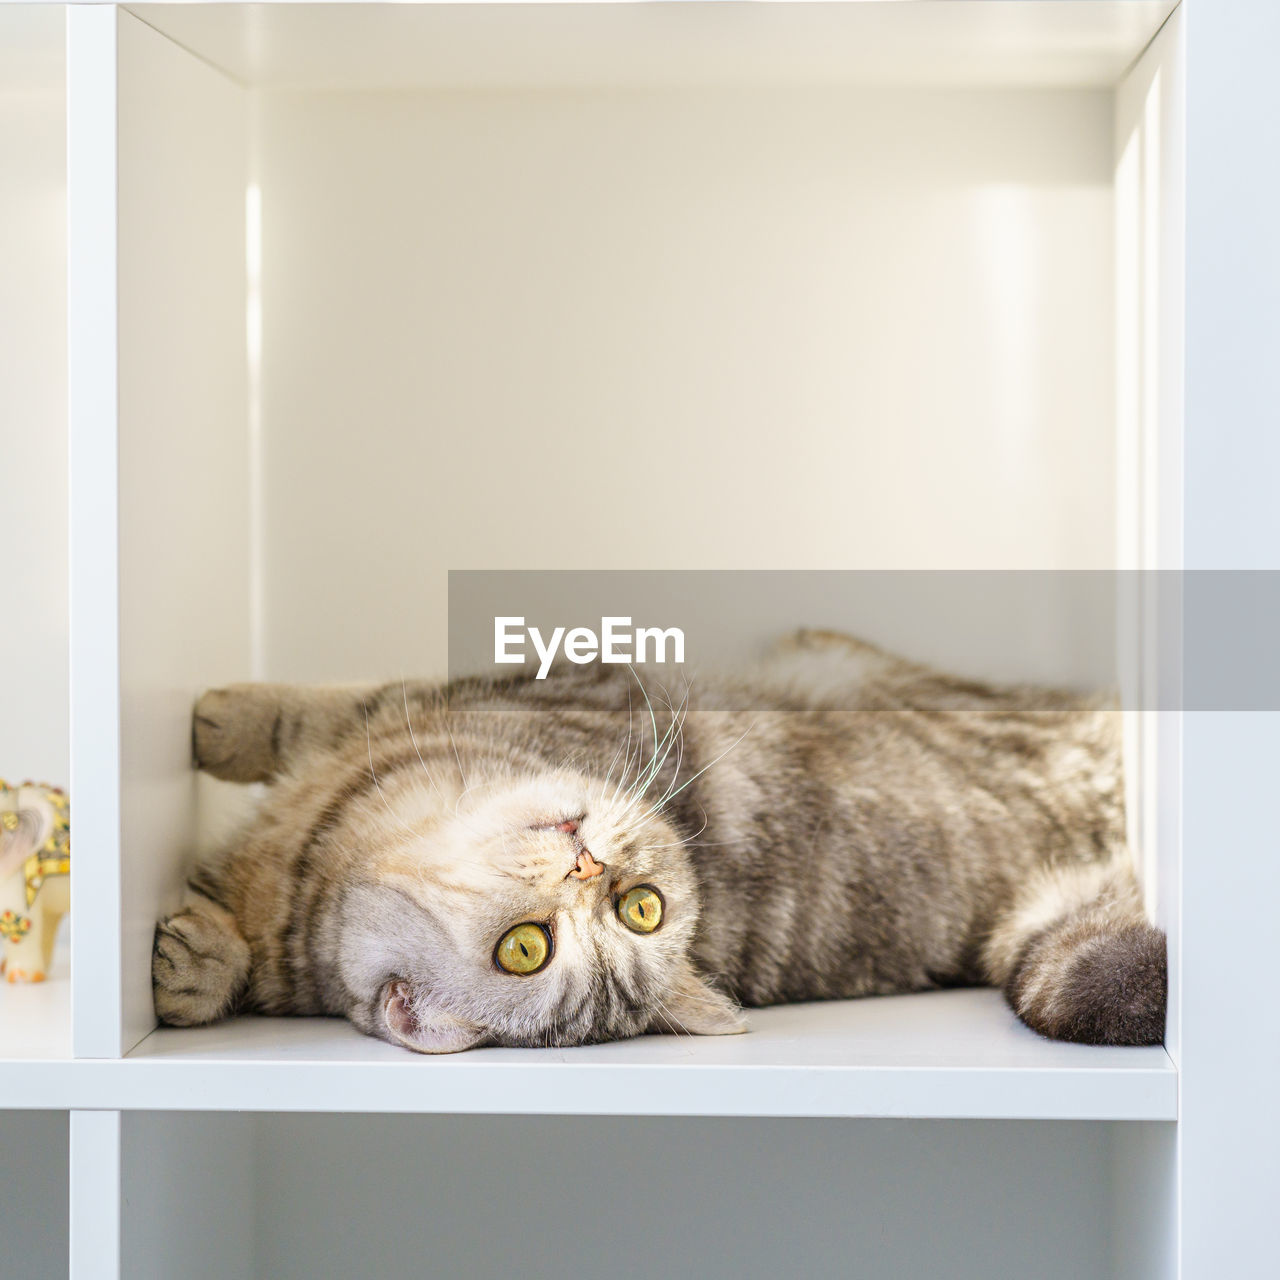 Scottish straight tabby cat is lying on shelf, cat is in closed confined space, a large box or box